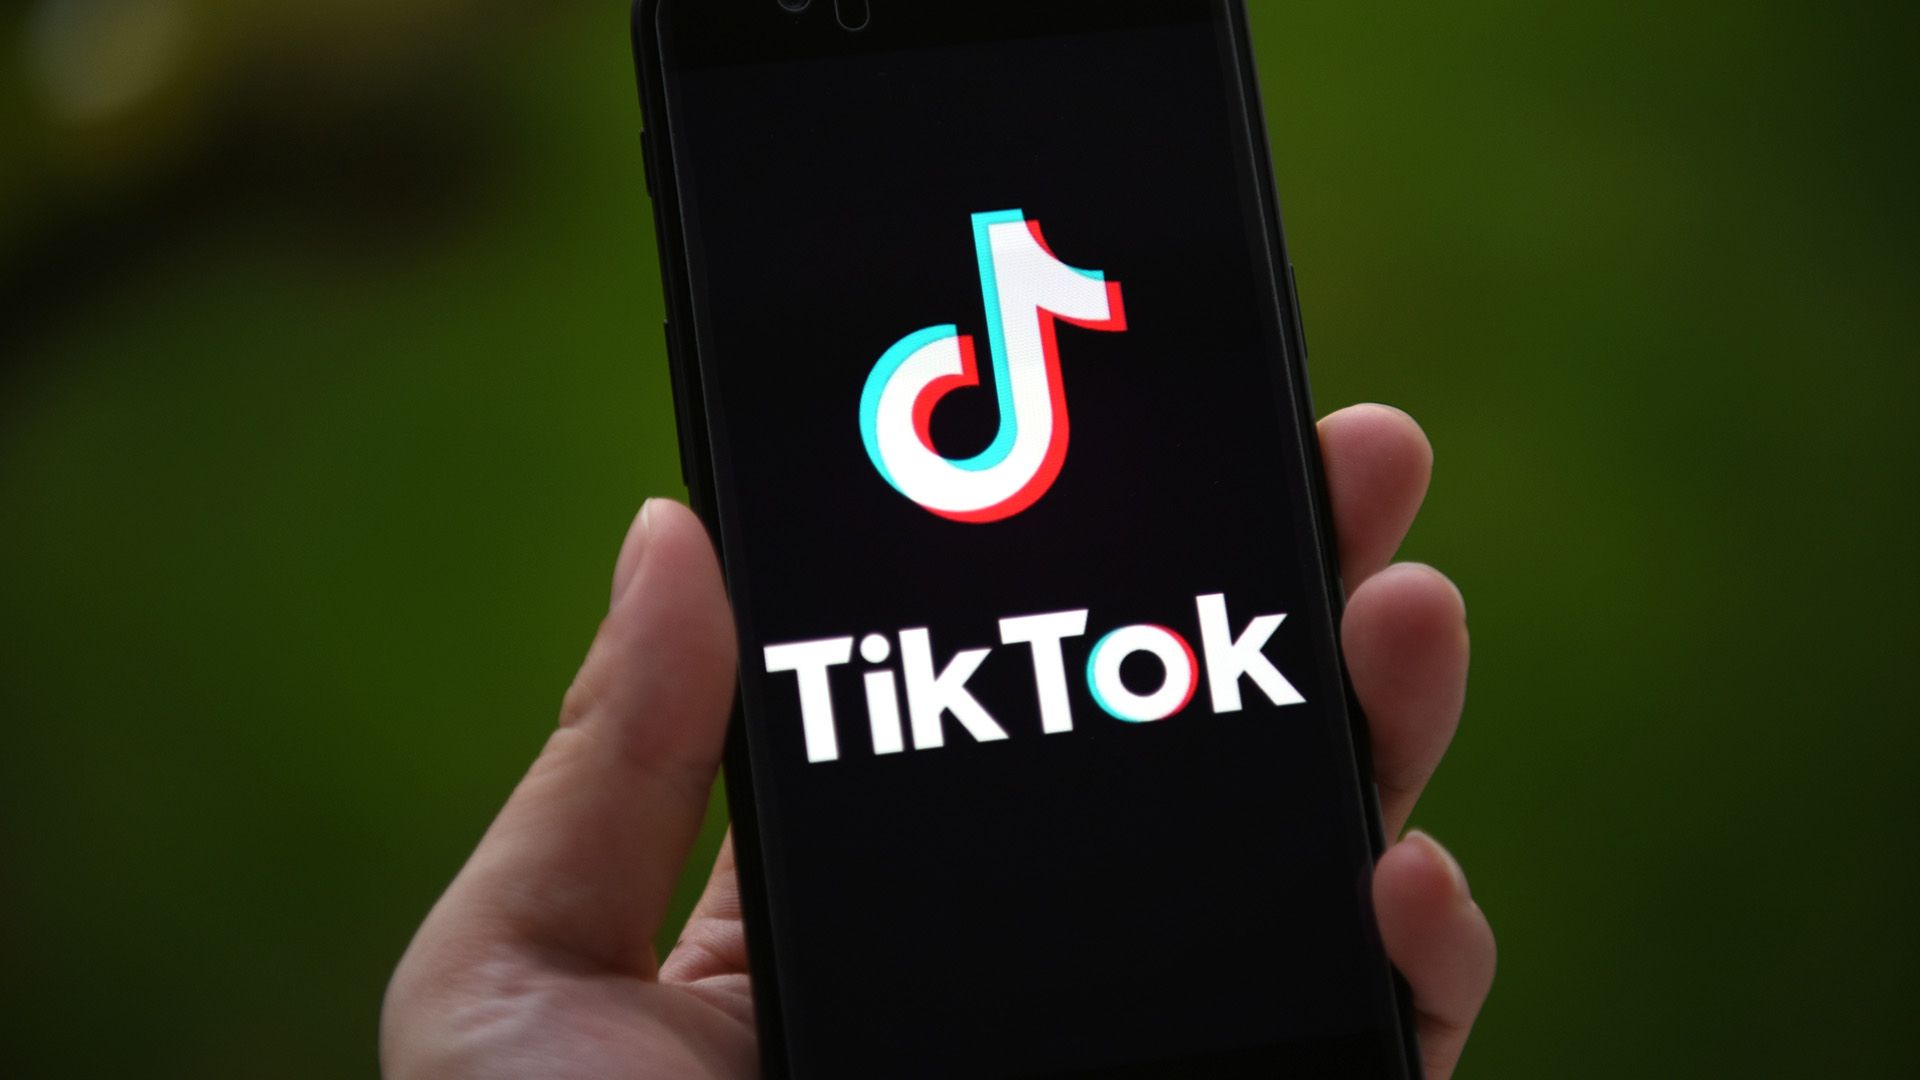 TikTok appearances initial augmented reality filter that utilizes iPhone 12 Pro’s LIDAR camera